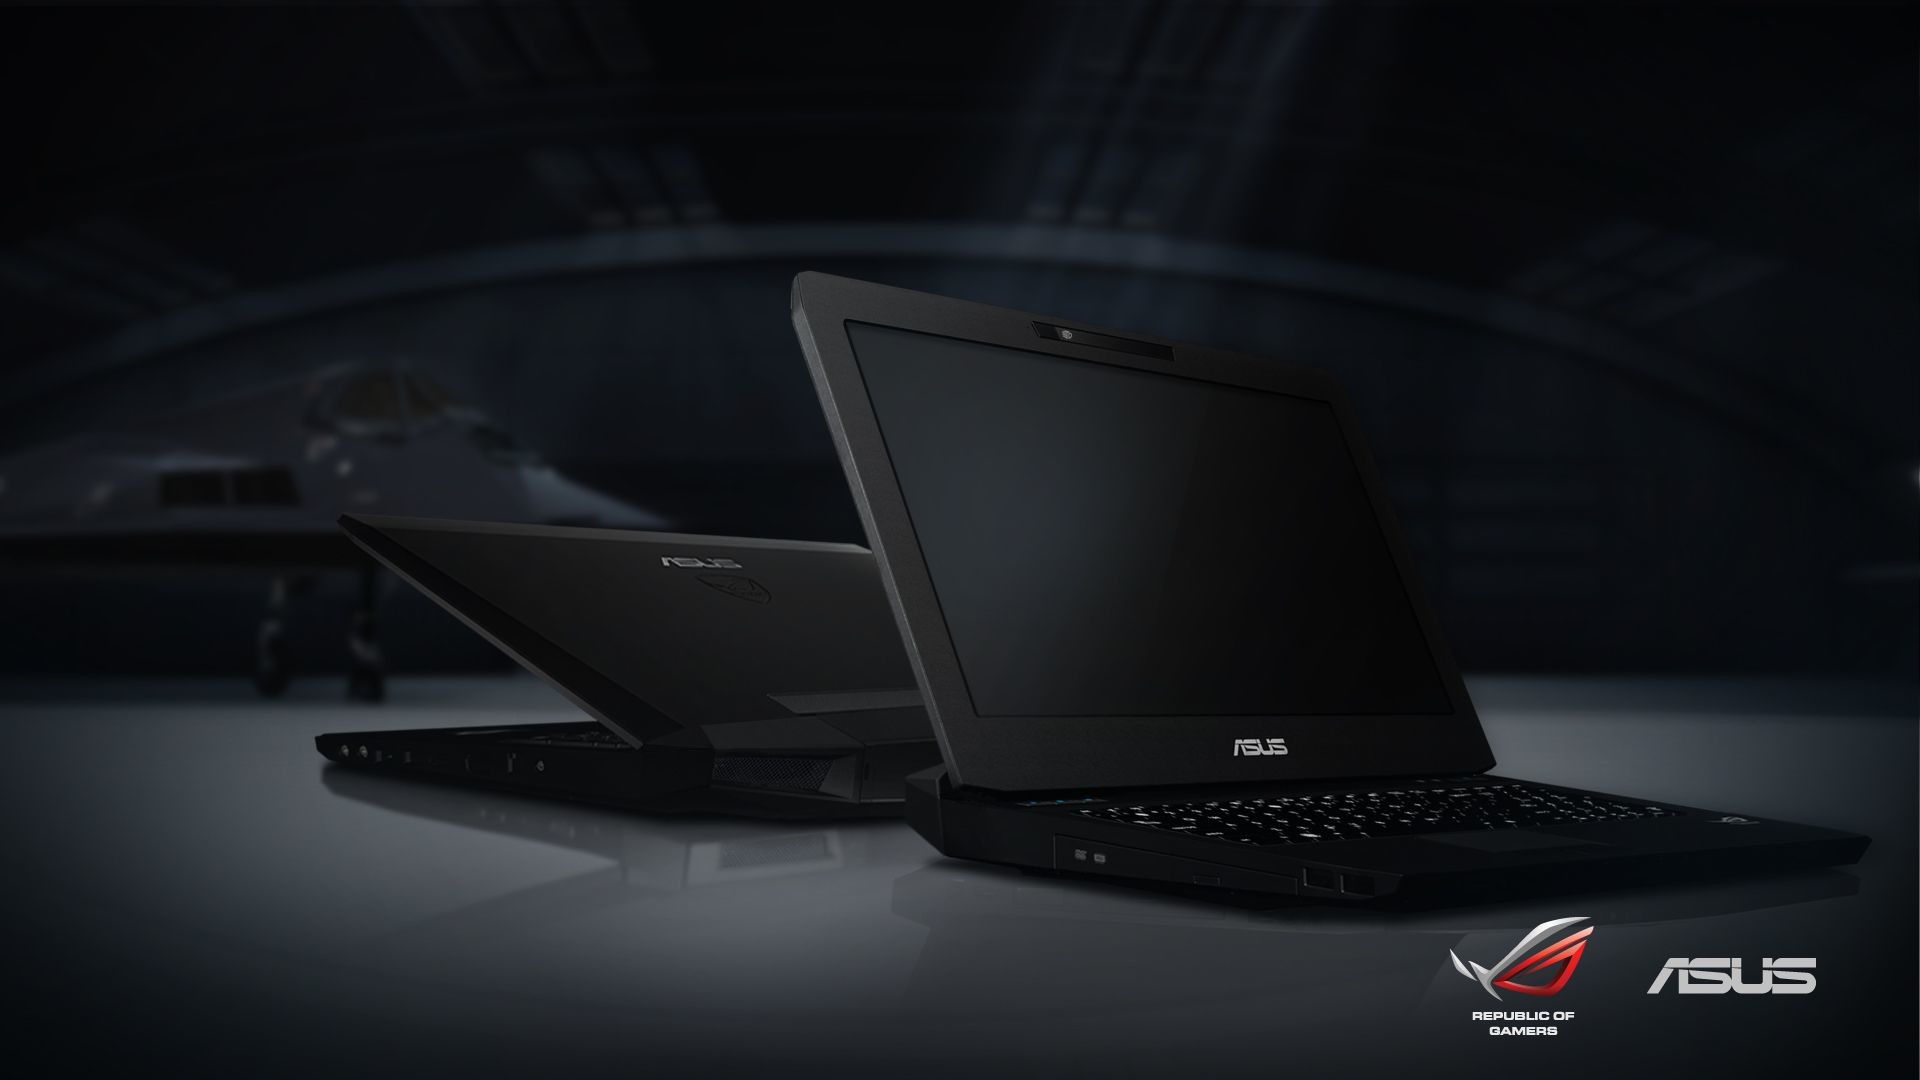 1920x1080 Notebook asus wallpapers hd asus blood wallpaper hd by .